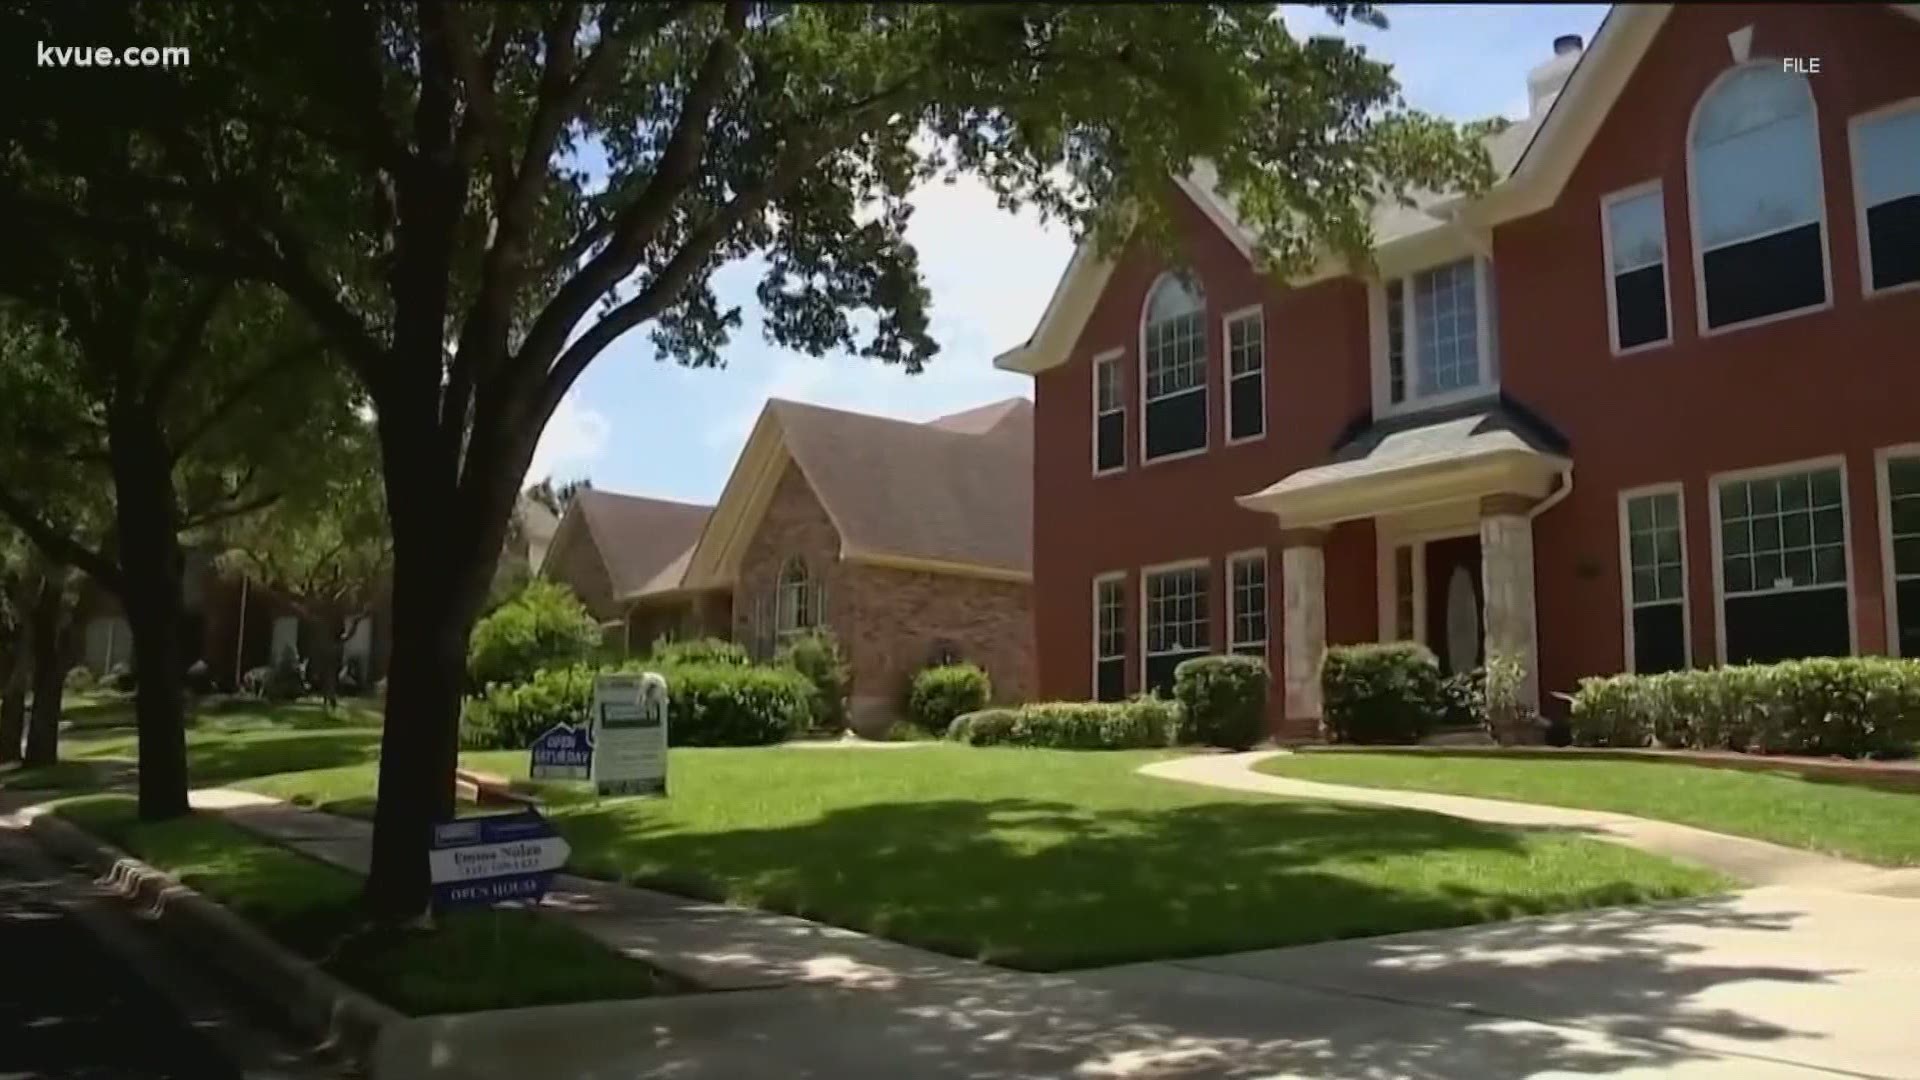 Houses for sale in Austin are sitting a little longer on the market. But is it a sign of a slow-down?